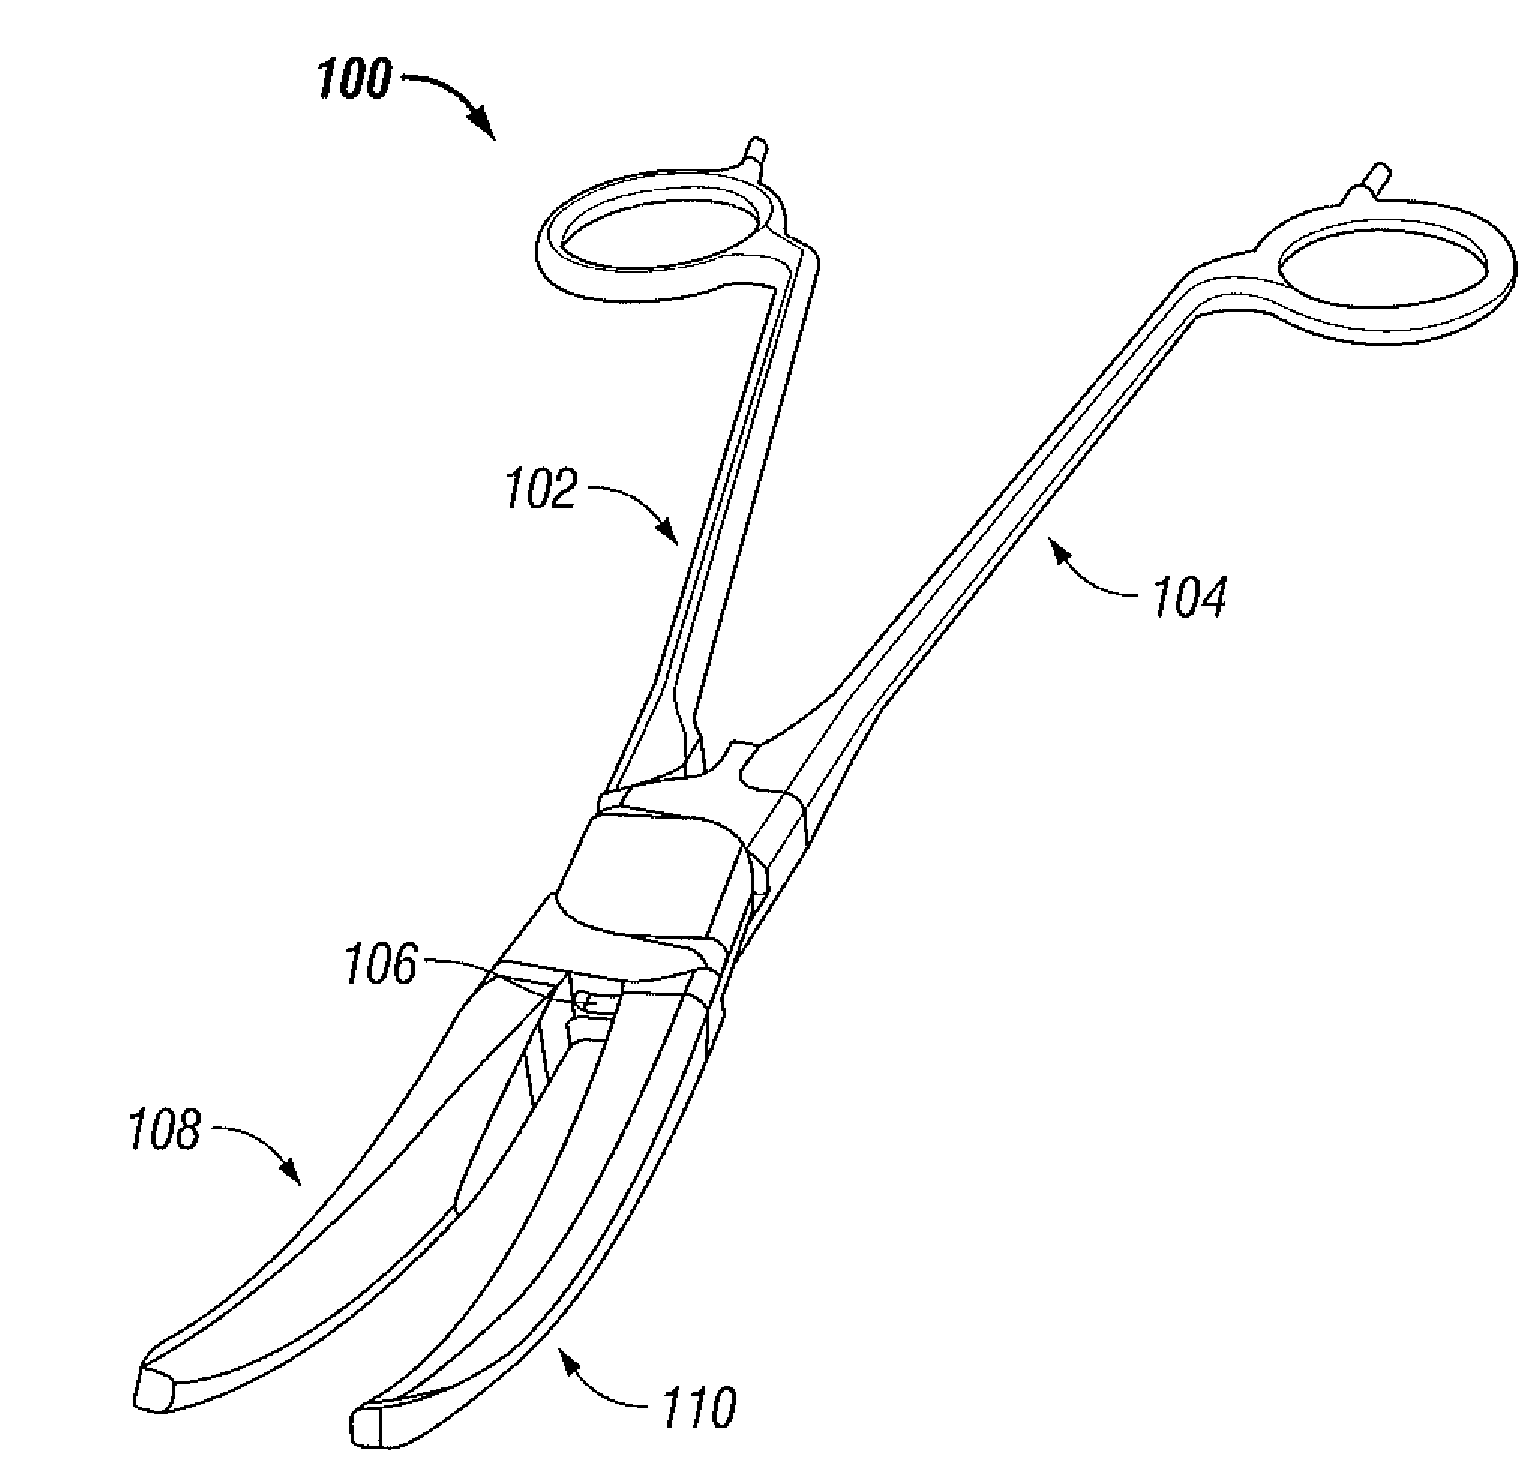 Bipolar Scissors for Adenoid and Tonsil Removal